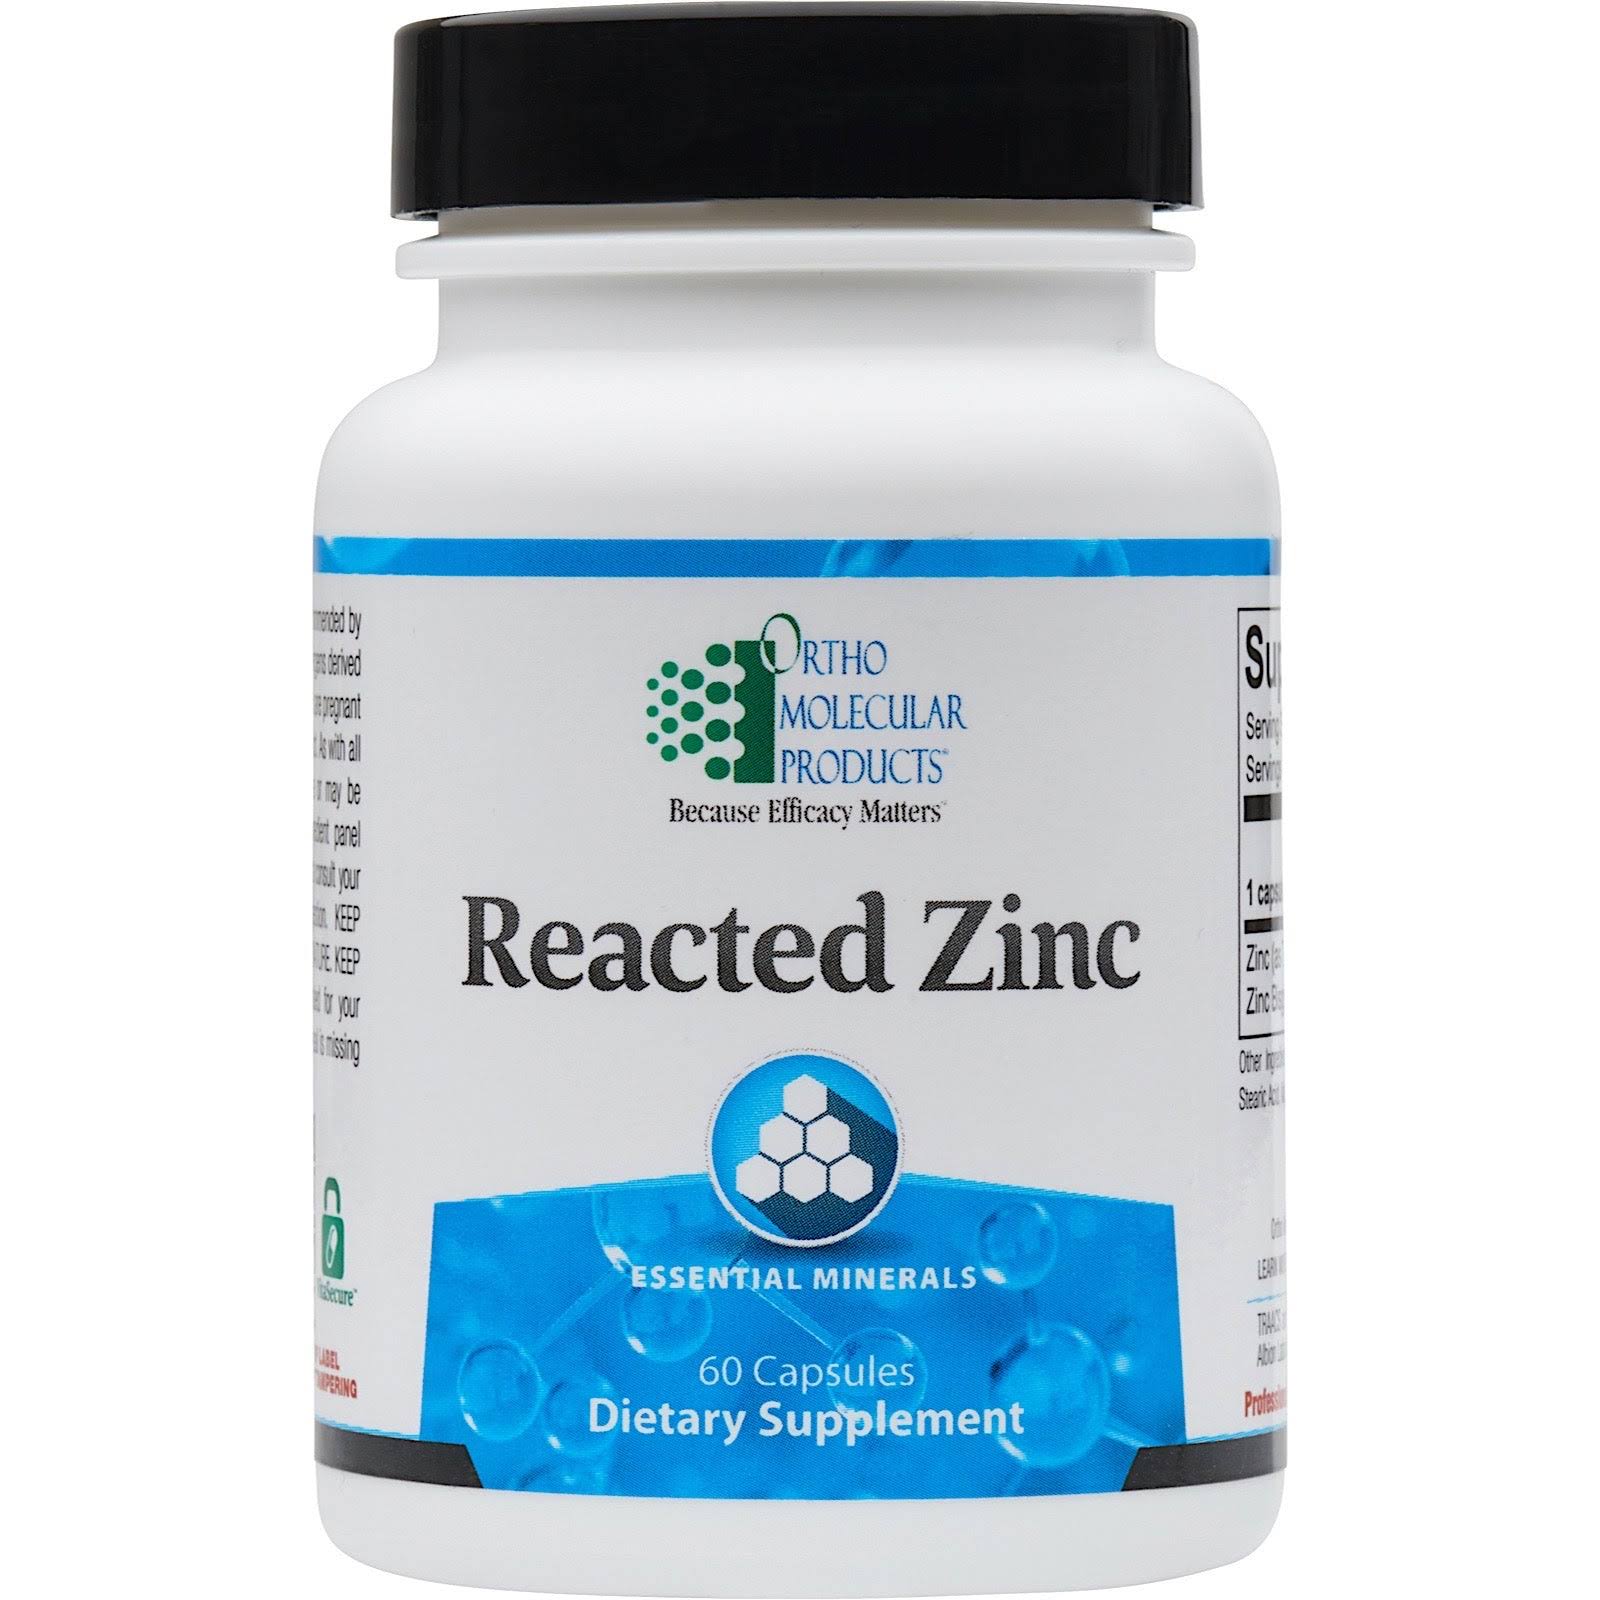 Ortho Molecular Products Reacted Zinc Essential Minerals - 60ct